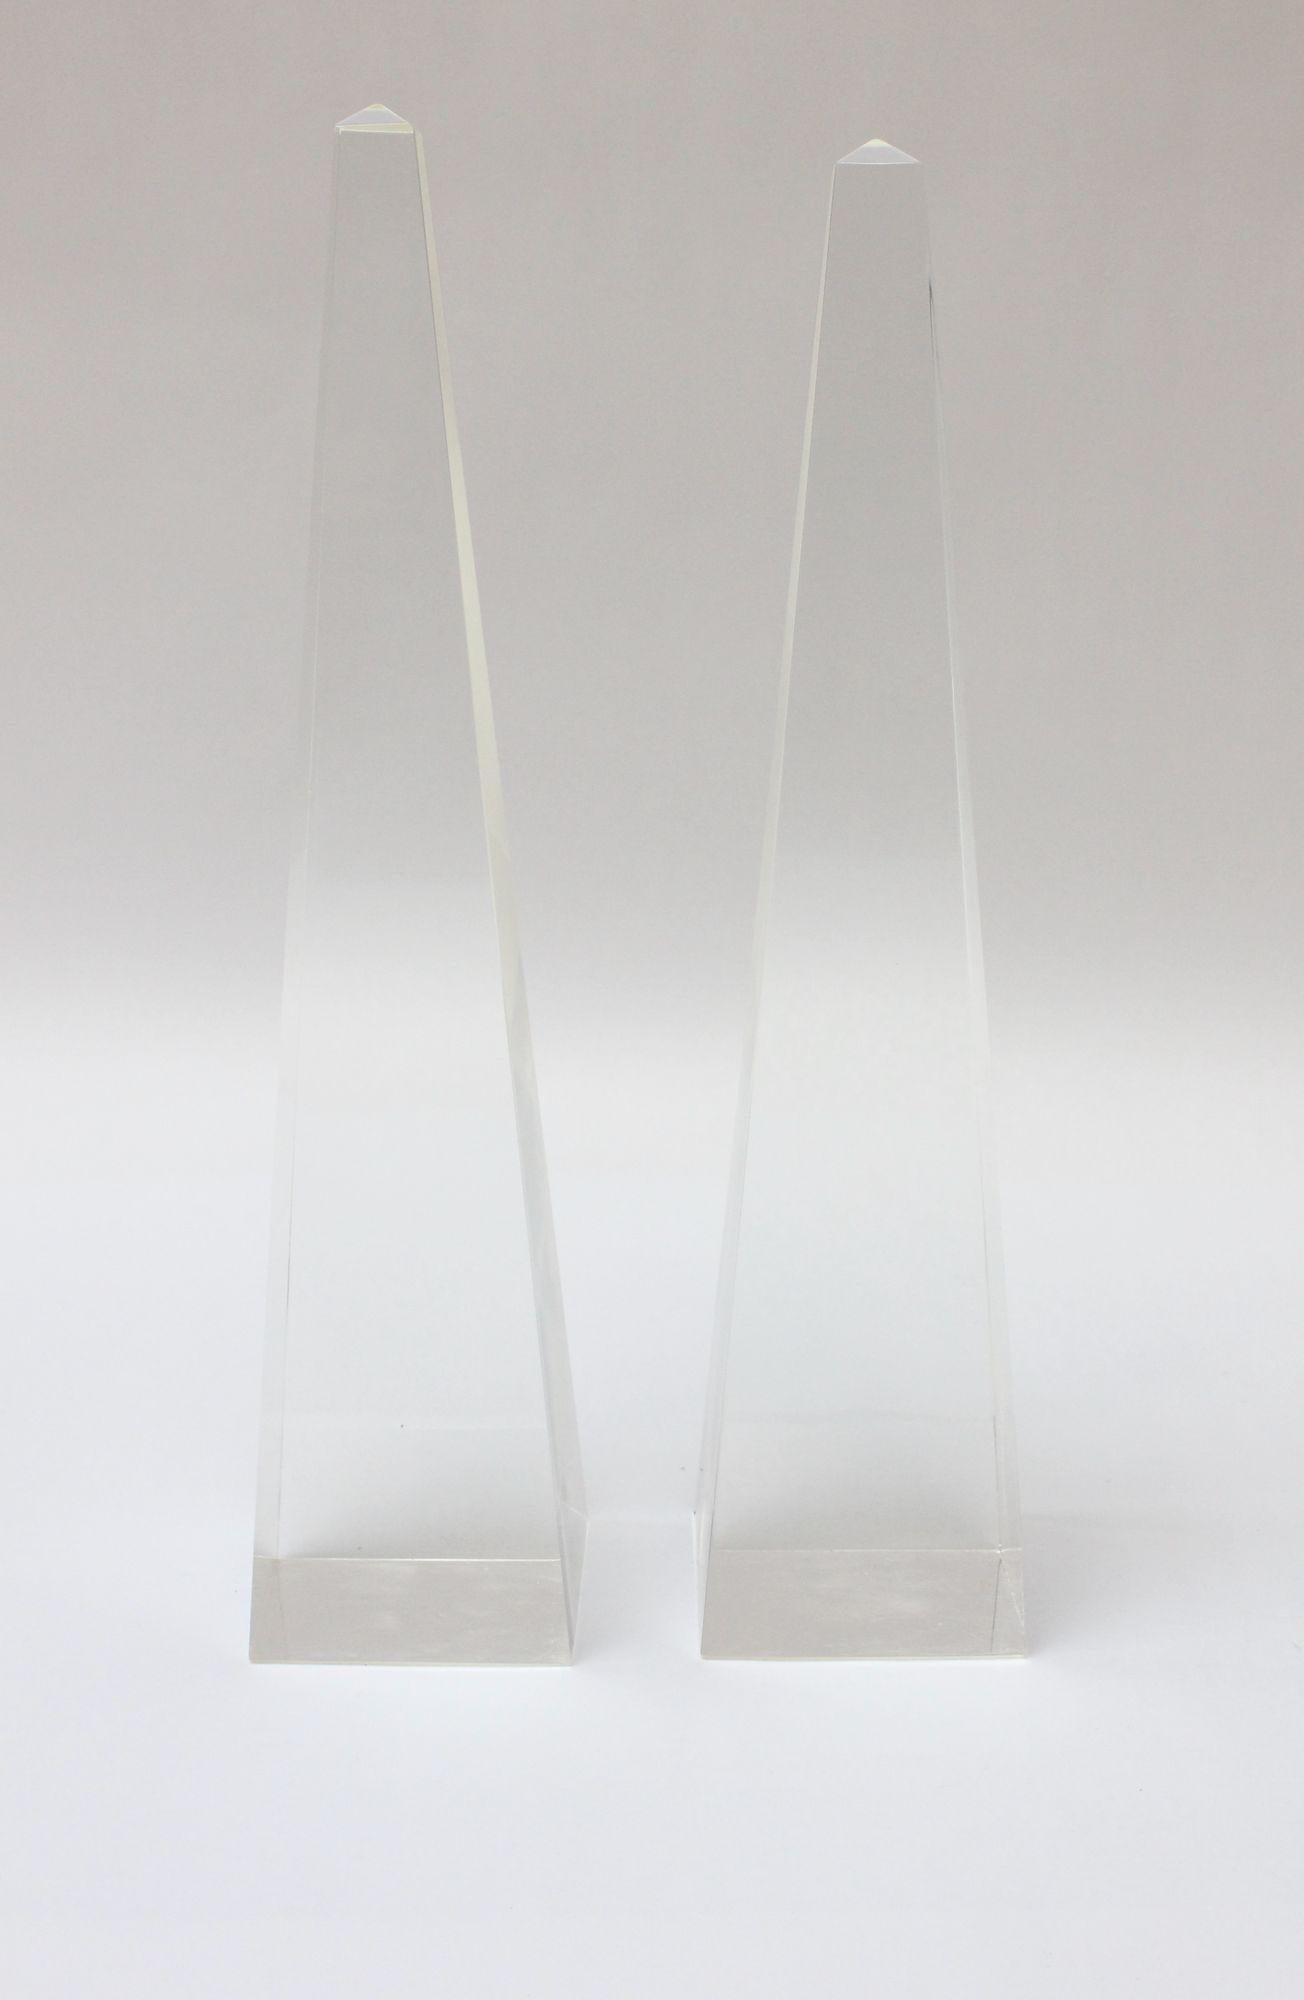 Hollywood Regency-Style lucite obelisks, ca. 1970s, USA.
Large-scale, statuesque decorative objects measuring H: 19.88